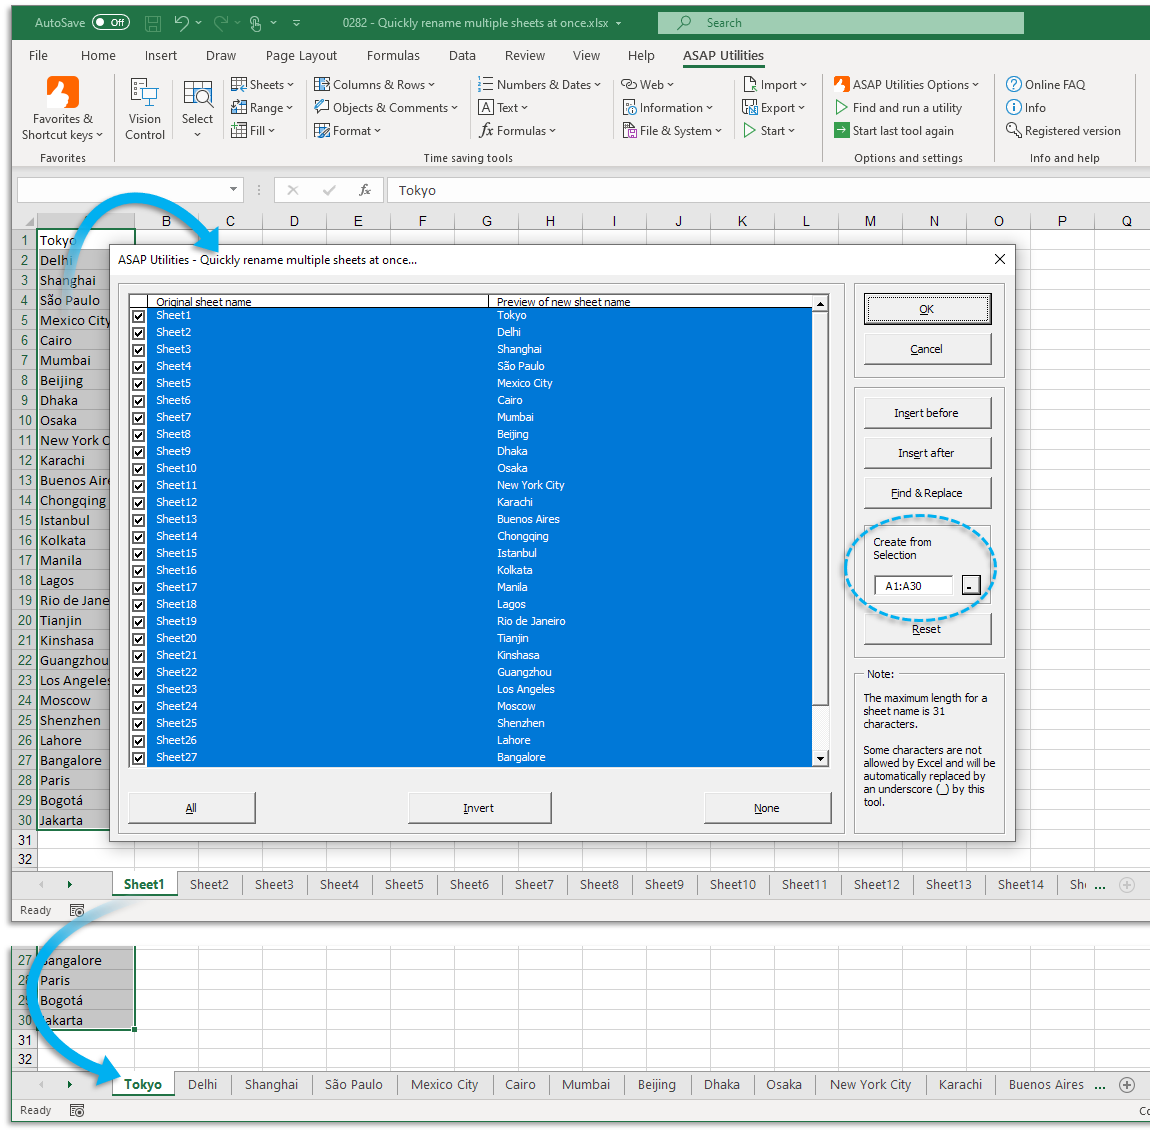 asap-utilities-for-excel-sheets-quickly-rename-multiple-sheets-at